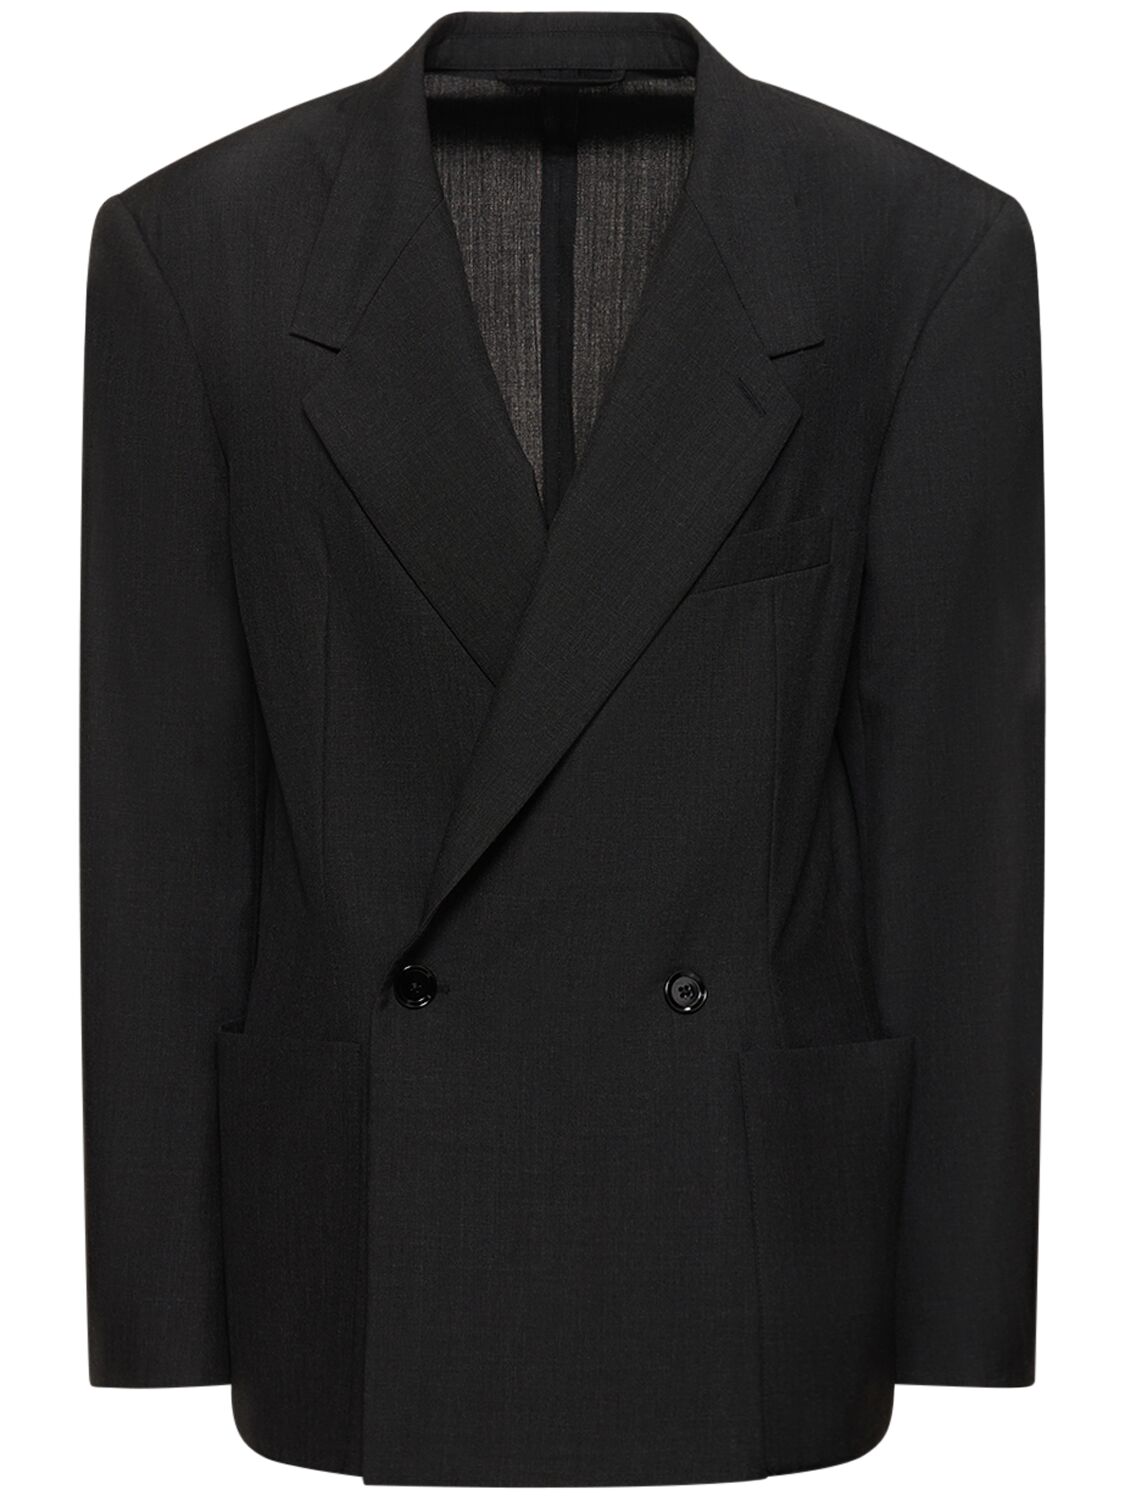 Image of Soft Tailored Wool Blend Jacket